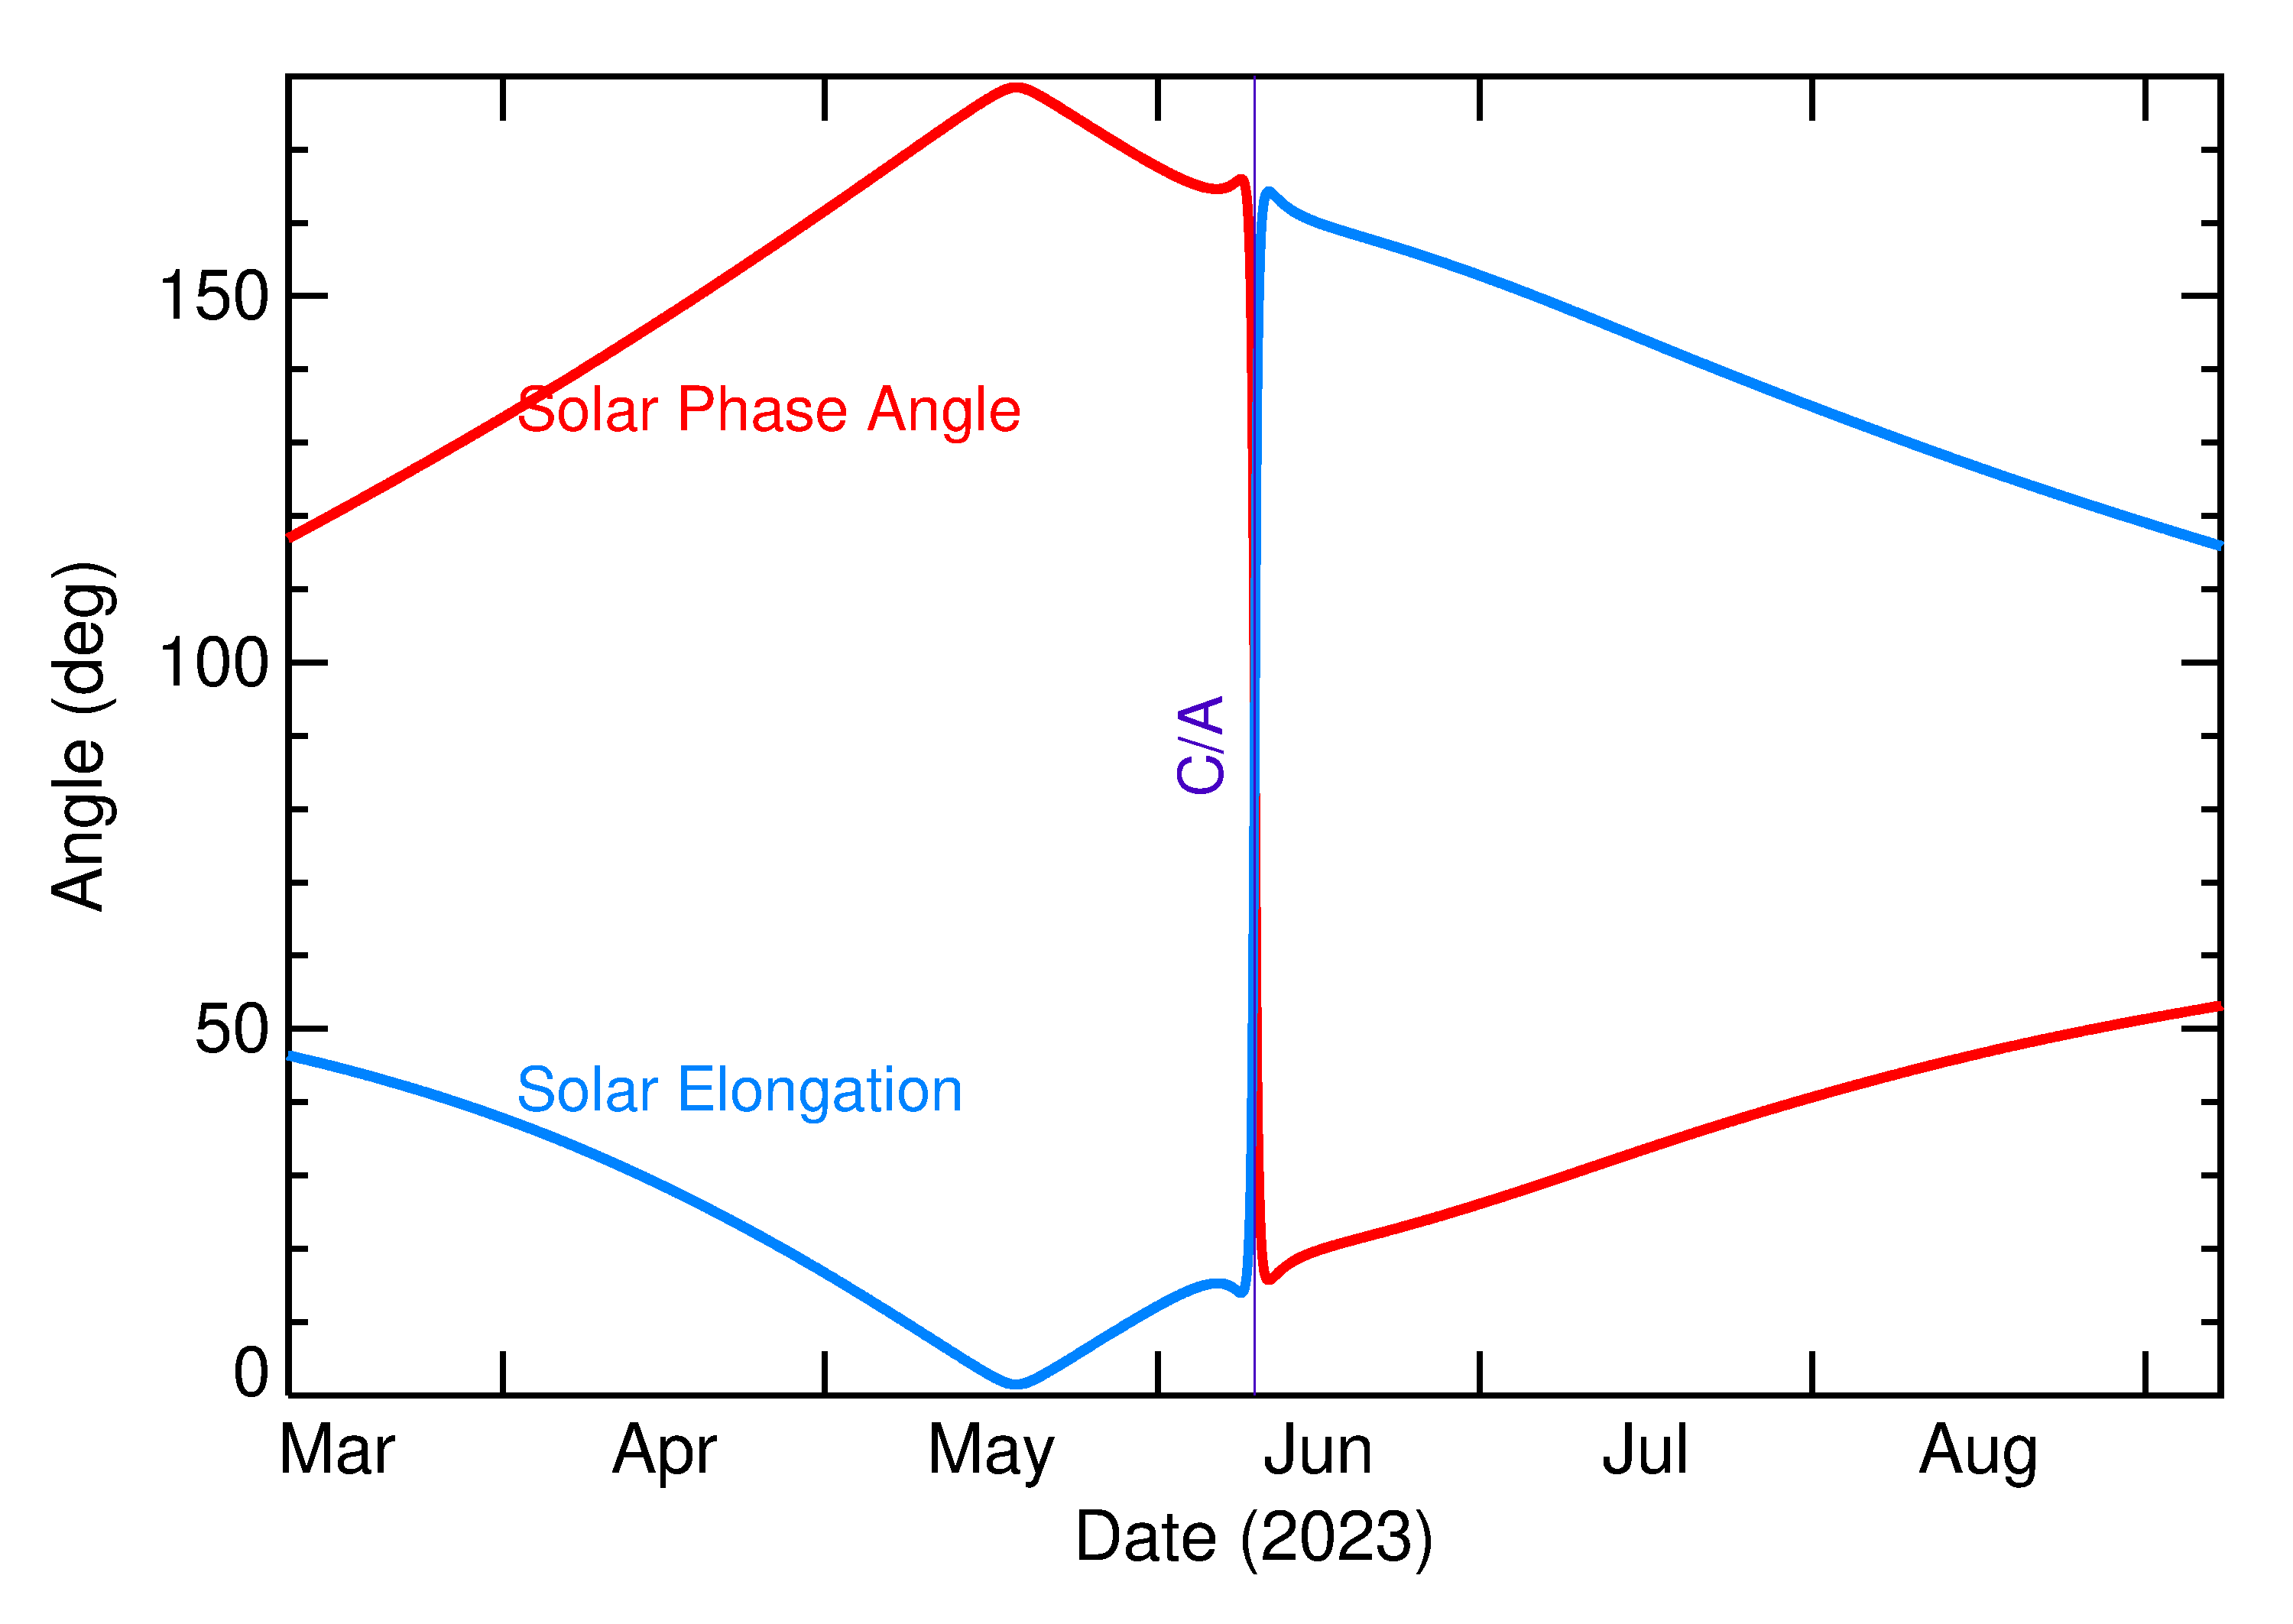 Solar Elongation and Solar Phase Angle of 2023 LS in the months around closest approach